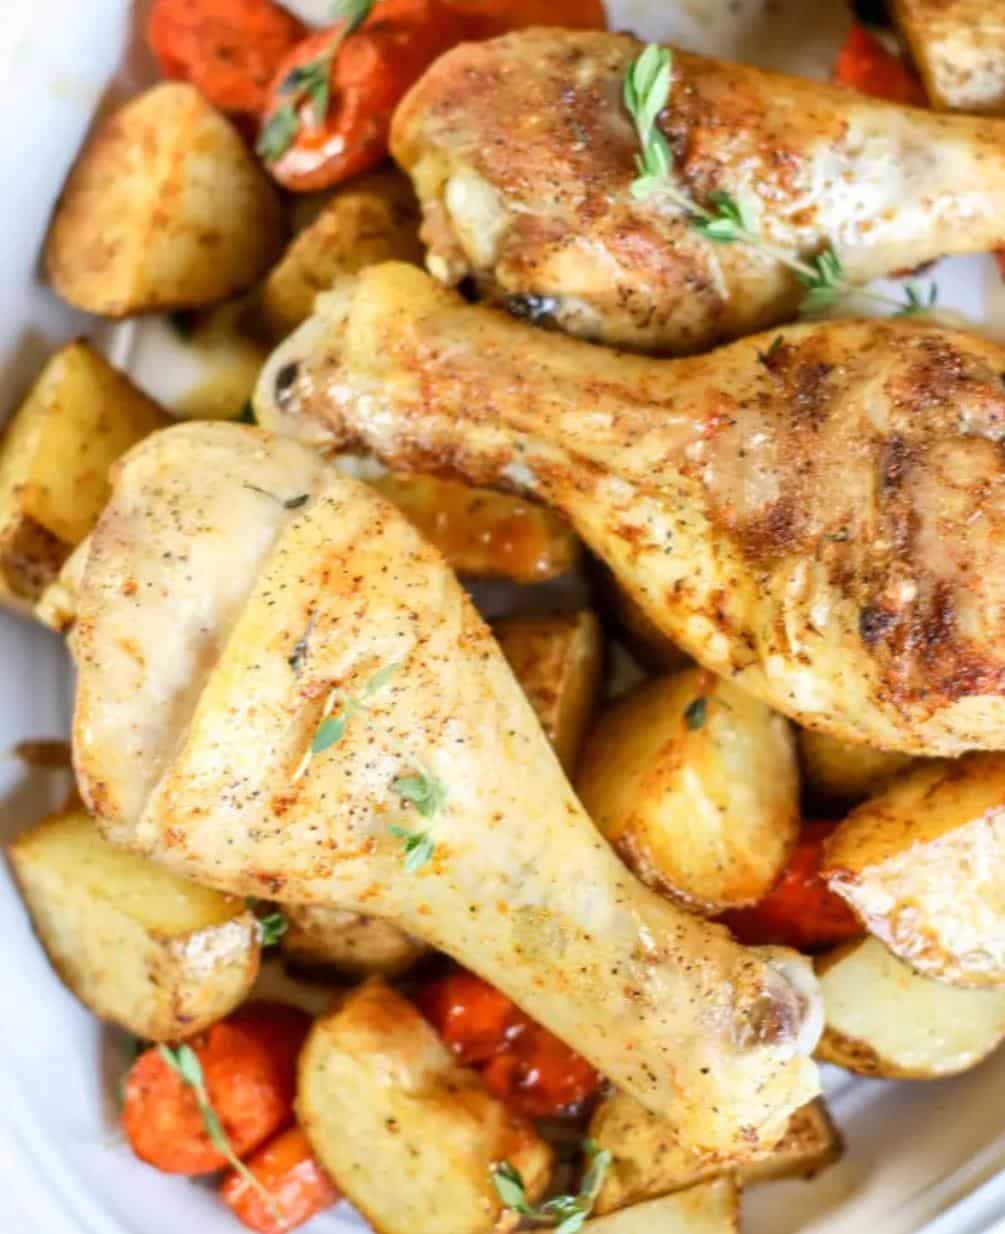 50 cheap chicken recipes for $10 or less that feeds at least 4 people.  This is a great dinner list for families on a budget!  You'll find baked, grilled, slow cooker, simple and quick chicken recipes here - plus much more! Bookmark this page.